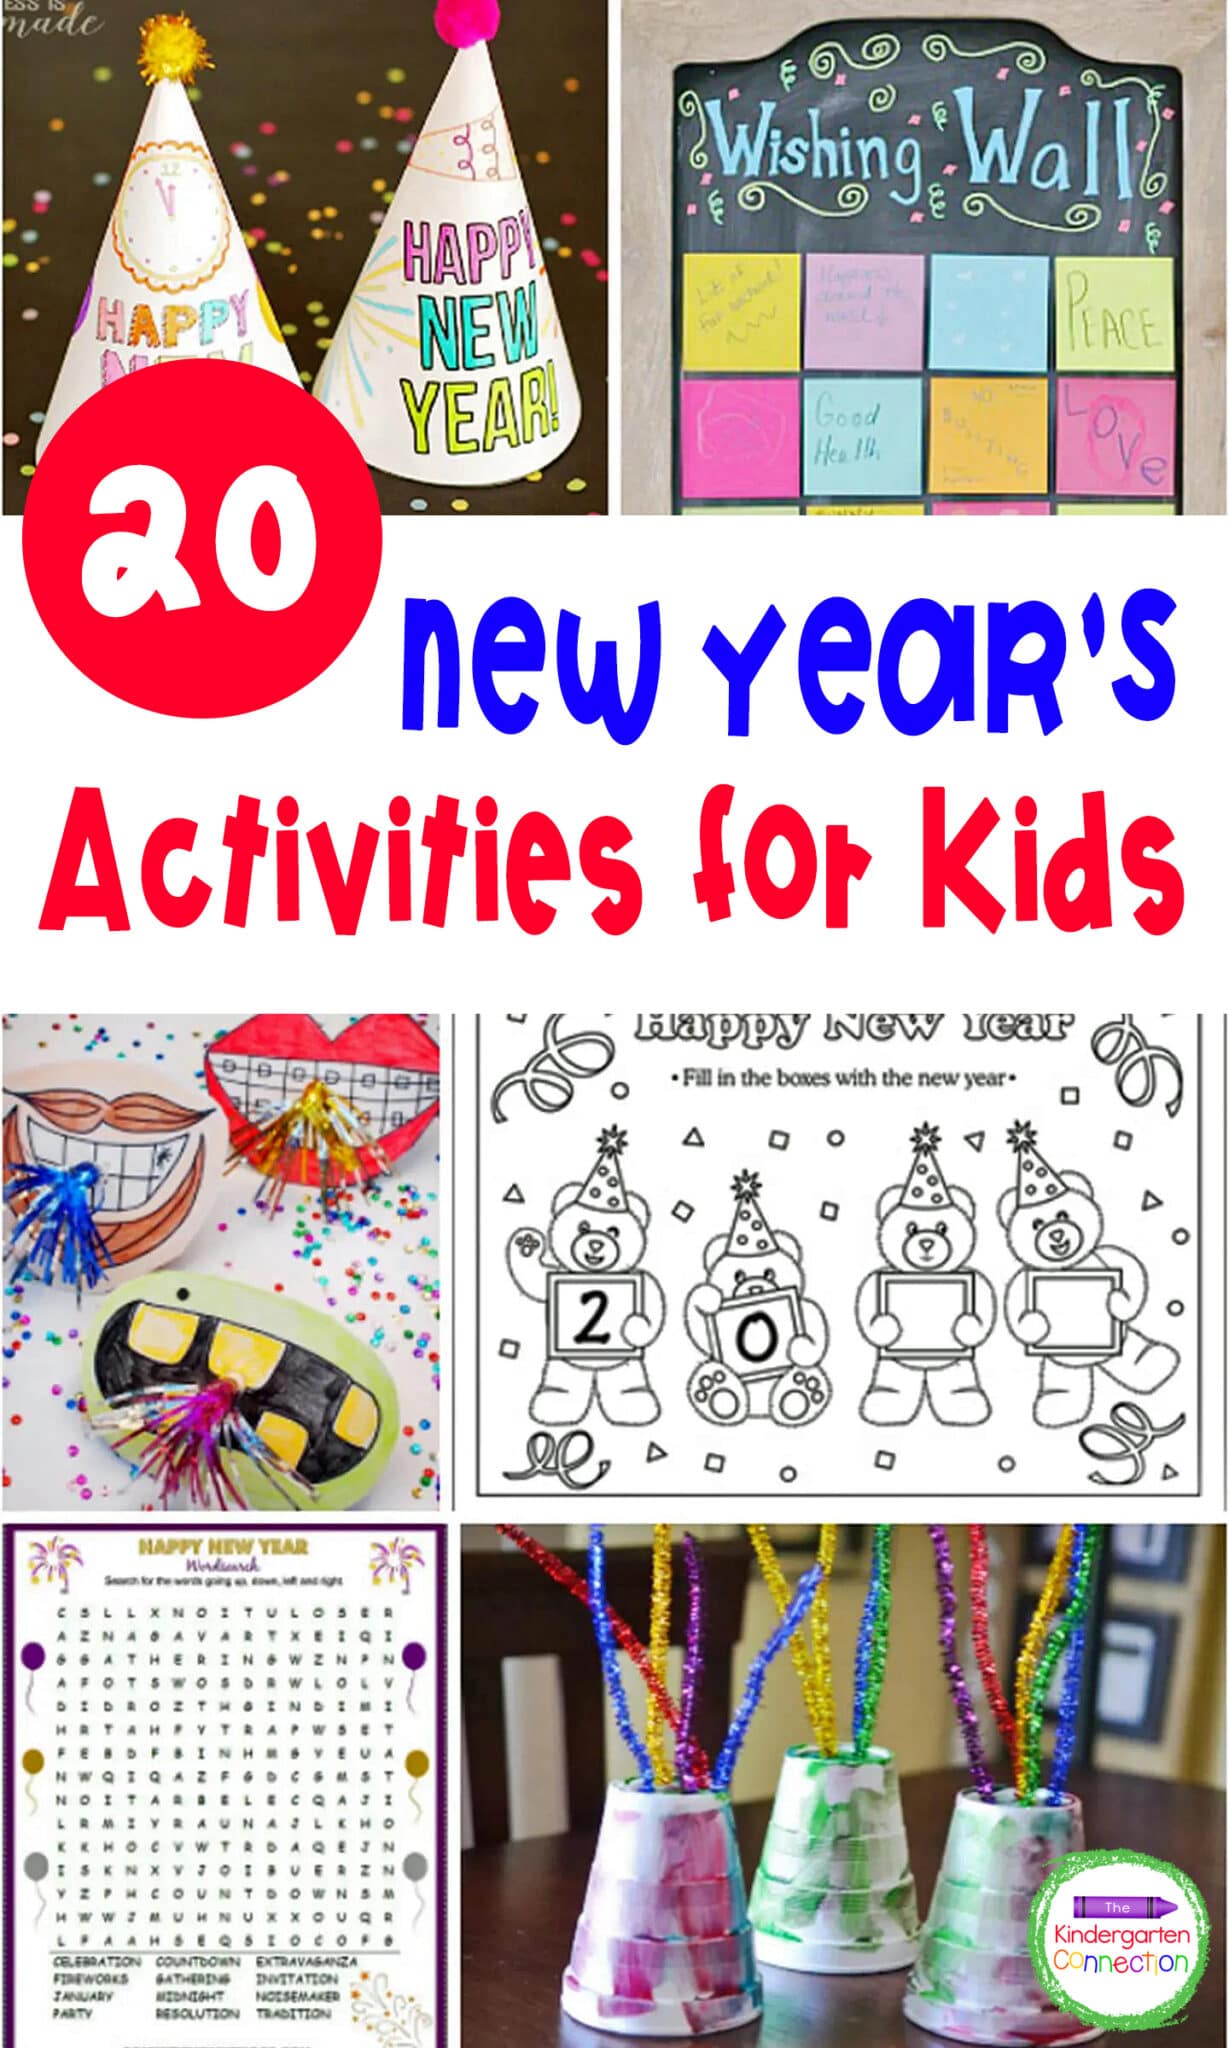 These 20 New Year's Activities for Kids are a great way to start the new year with a ton of fun as soon as the kids return from Winter Break!